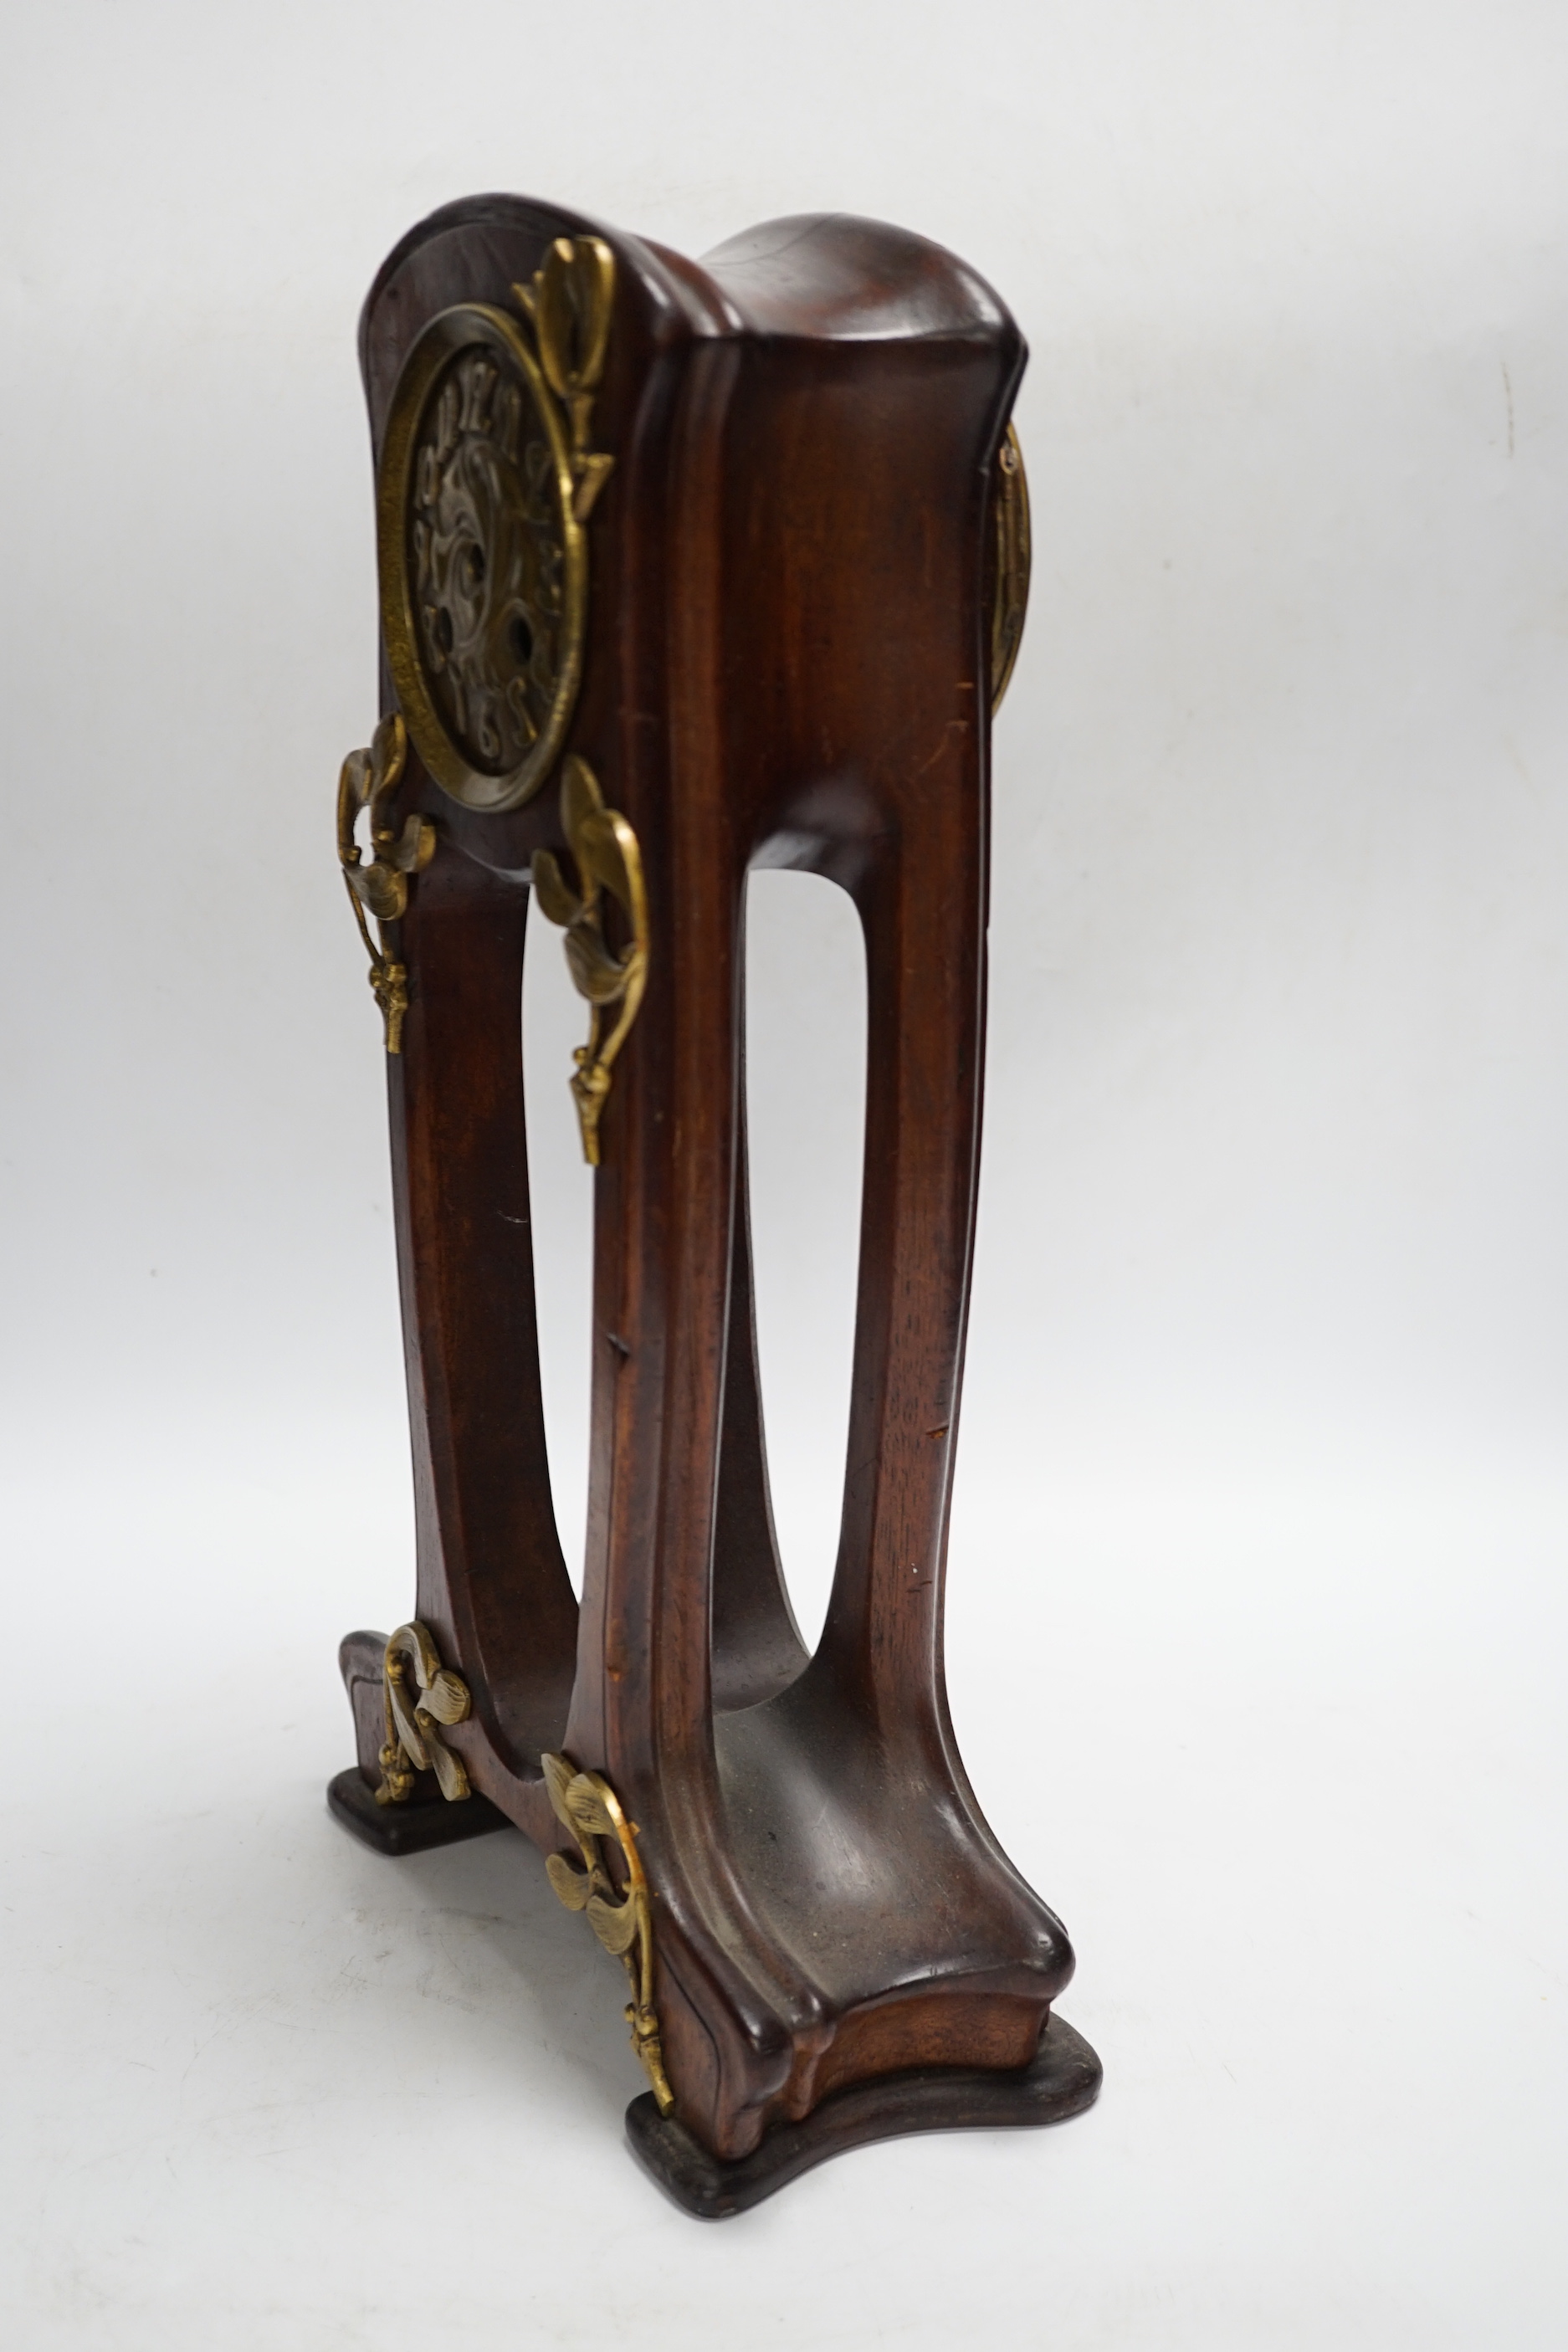 A French Art Nouveau mahogany and brass-mounted mantel clock, 39cm